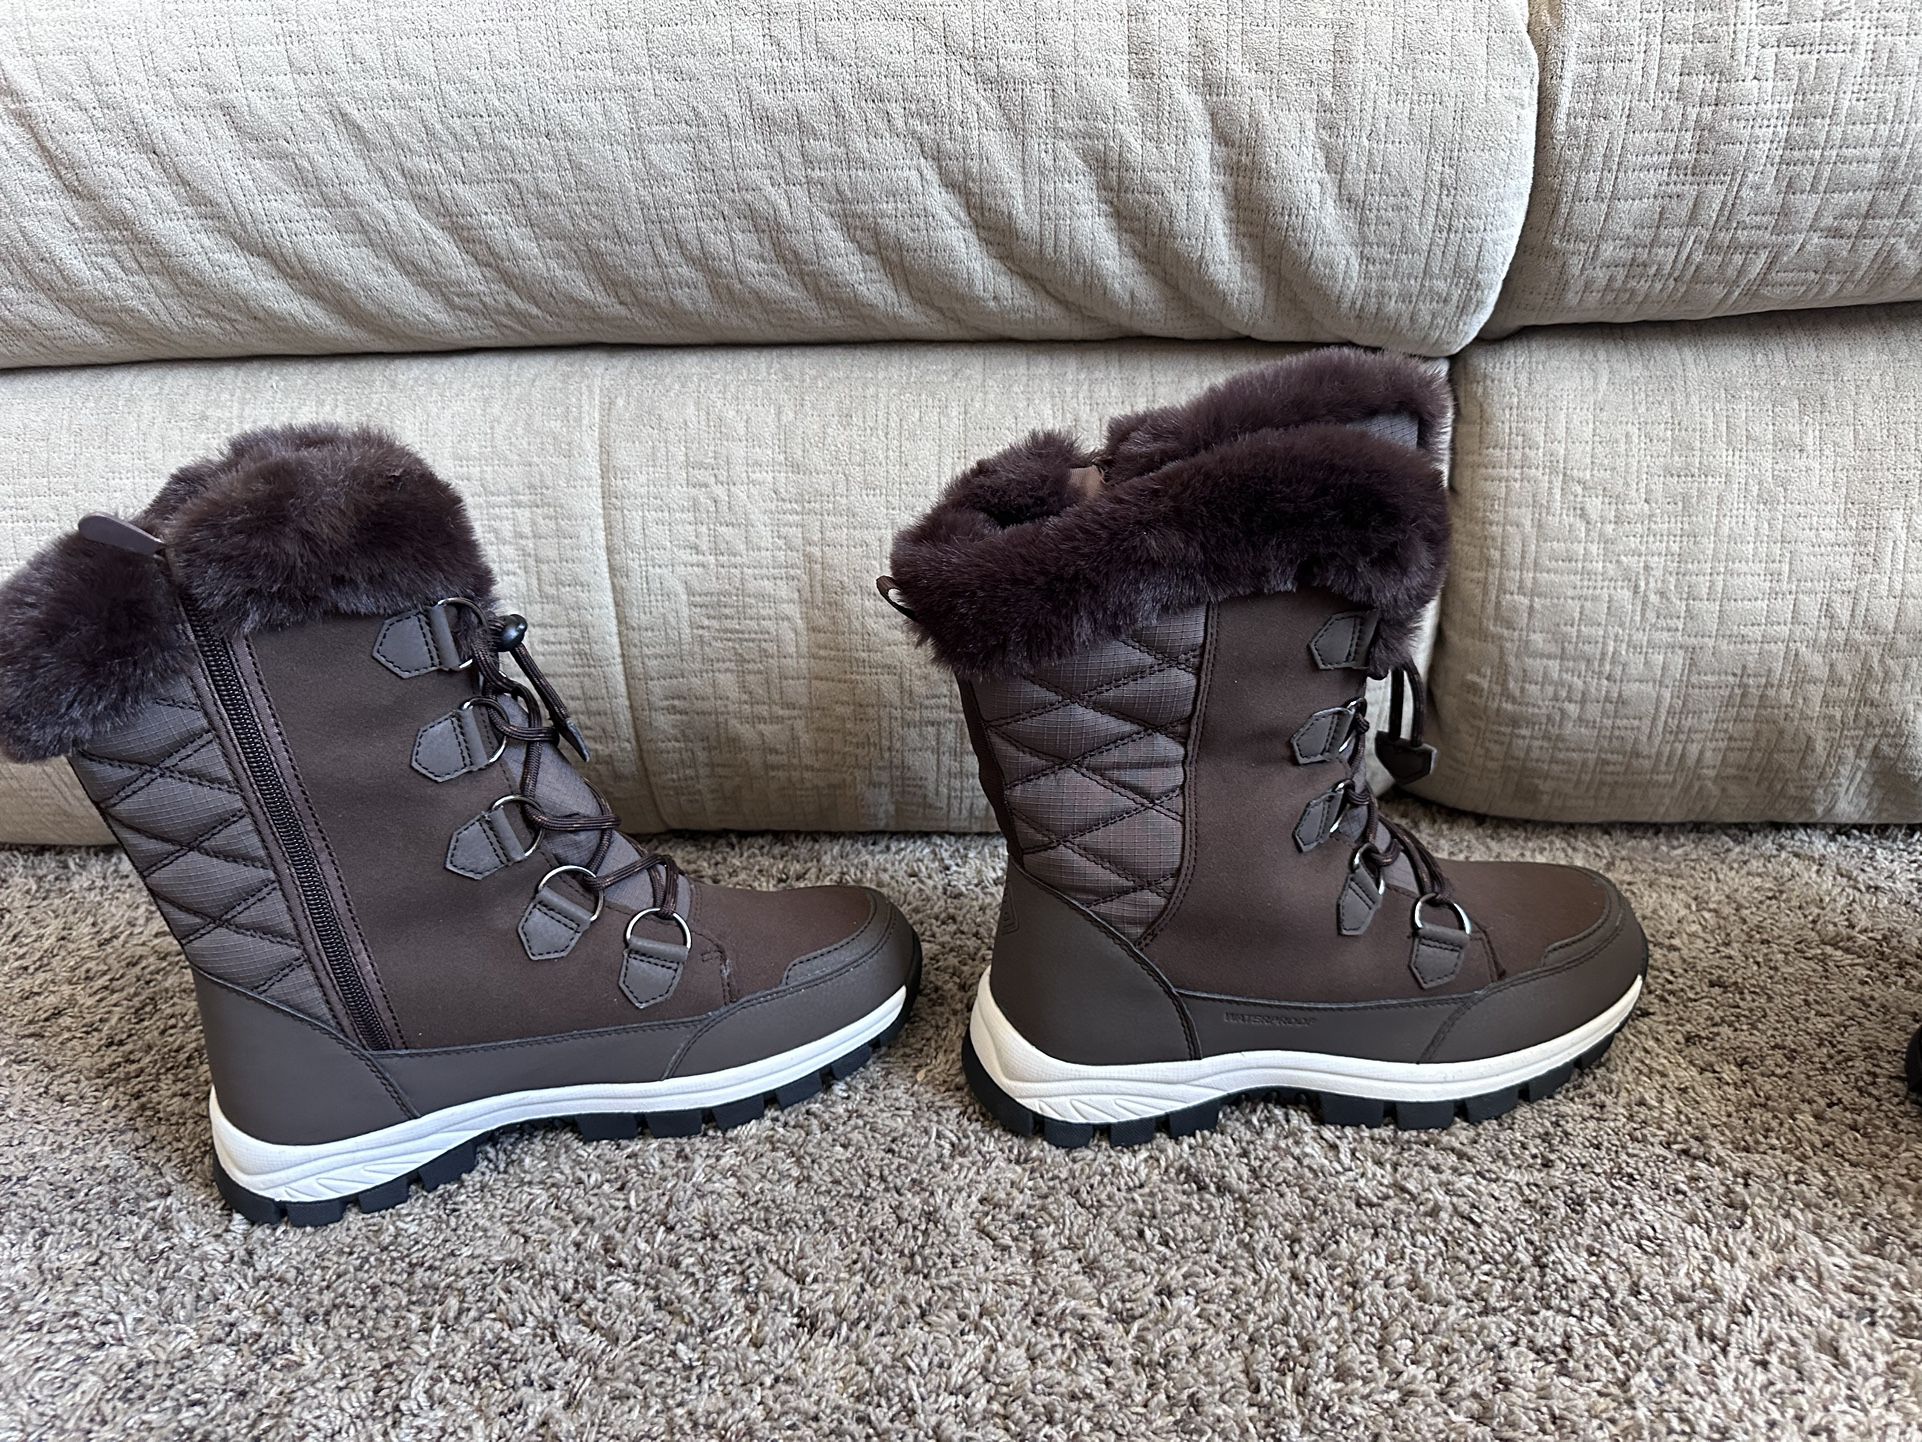 New Dream Pairs women's size 9 snow boots